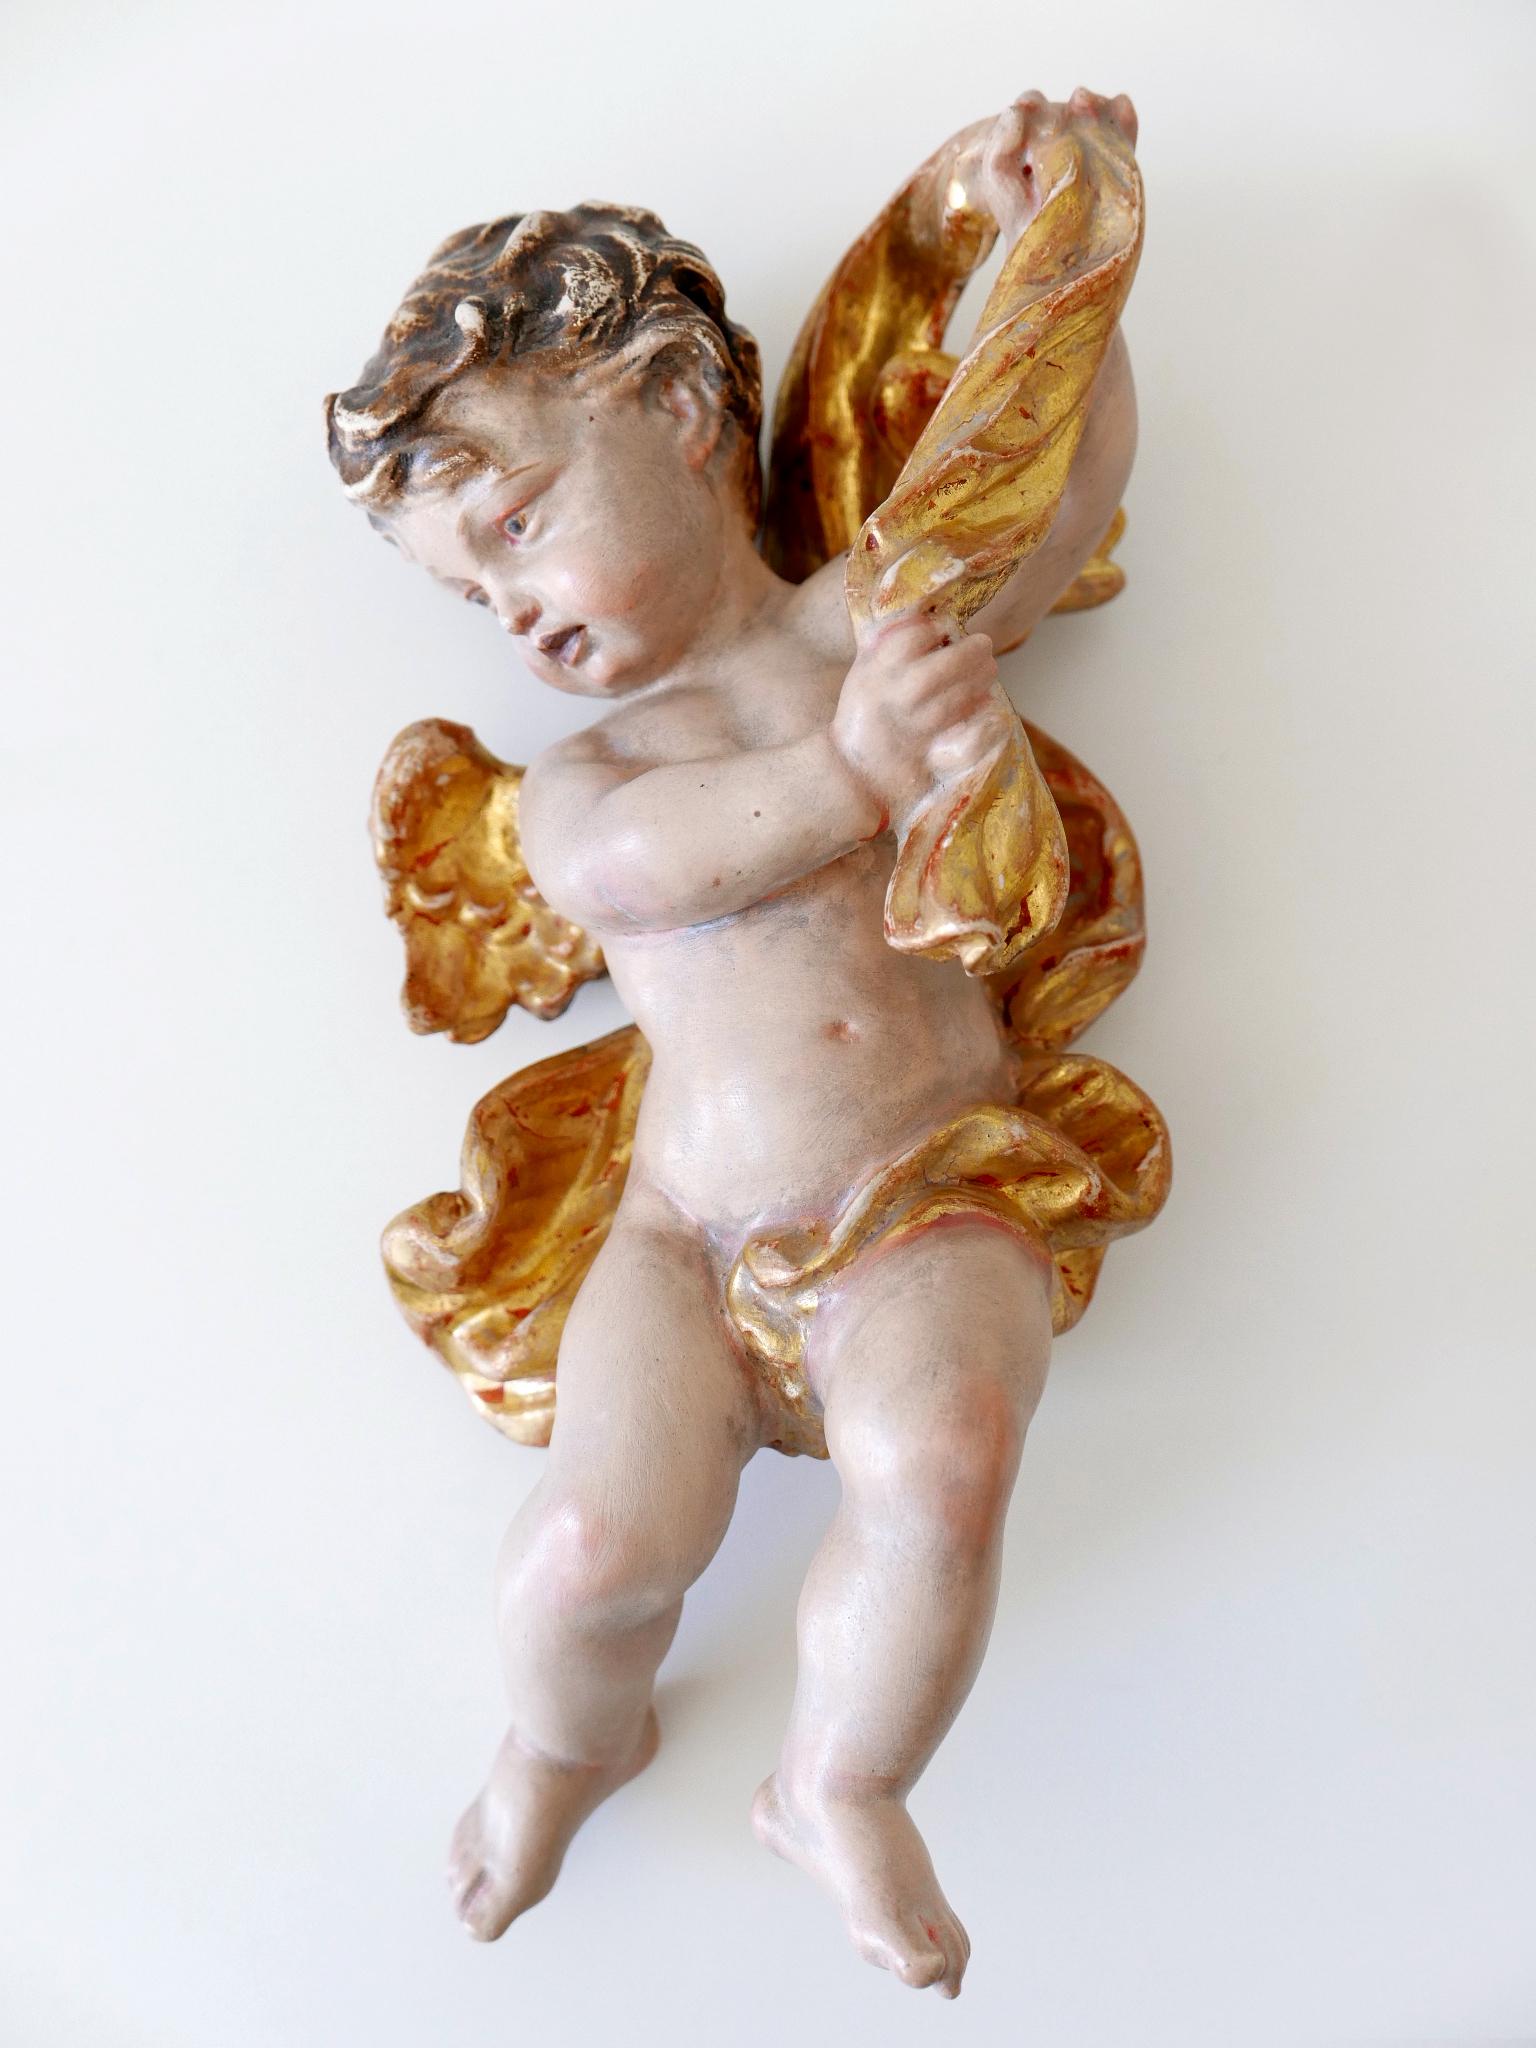 Set of four beautiful and highly decorative hand-carved painted wooden putti / cherubs.
Two of them are with label. L. Röger, Augsburg and Karl Storr, München. Made probably in 1960s. (Please see the images).

Dimensions of each putti / cherubs from